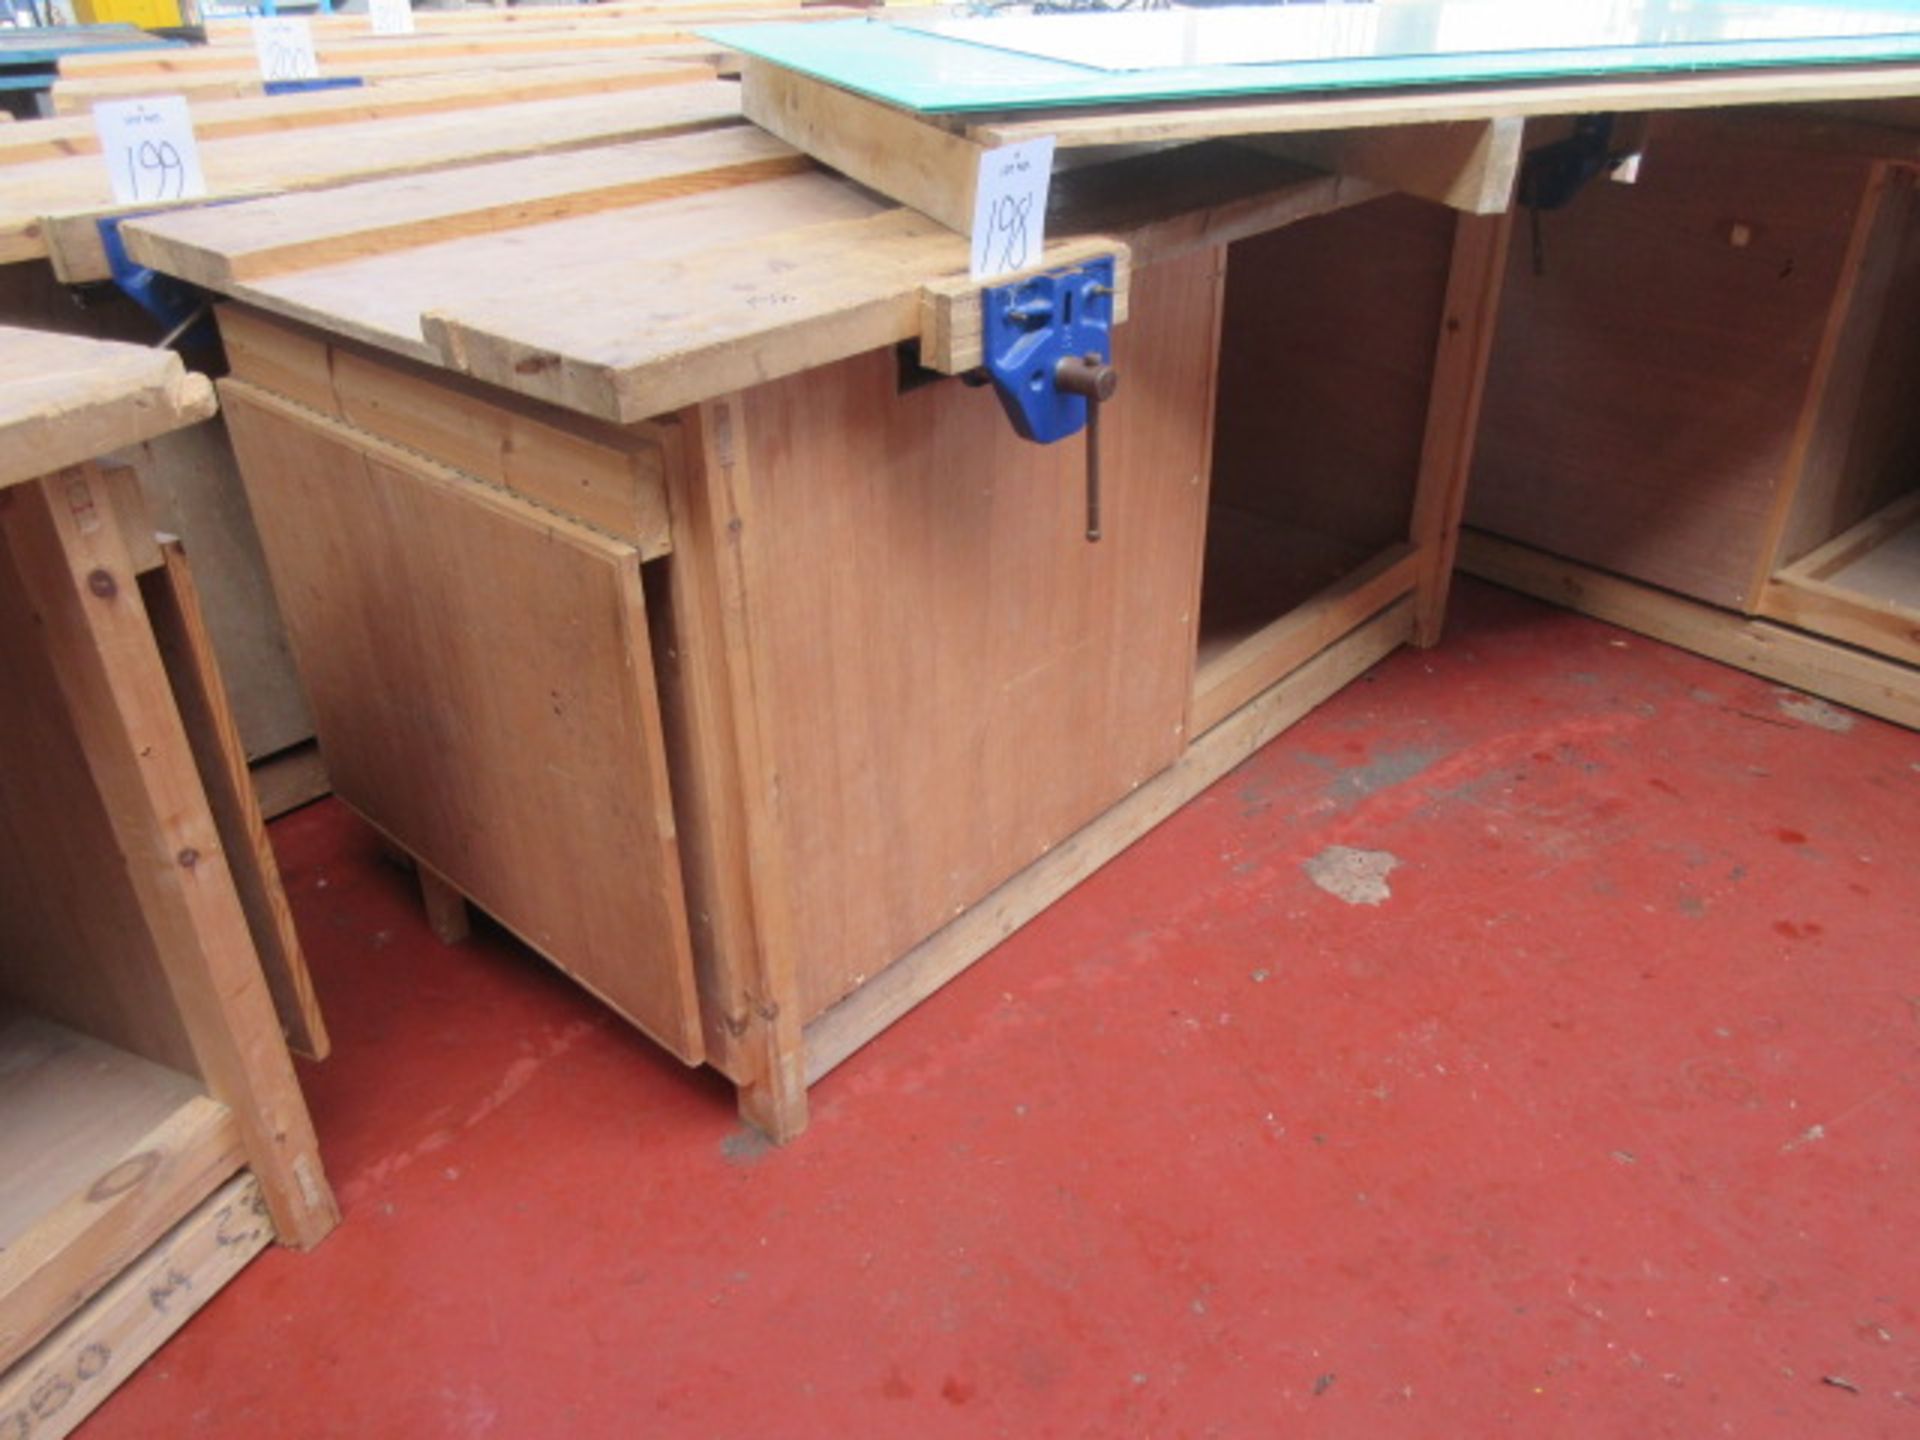 Wooden joiners bench 6' x 3' with 2 vices. Holehouse Road. Garage workshop.